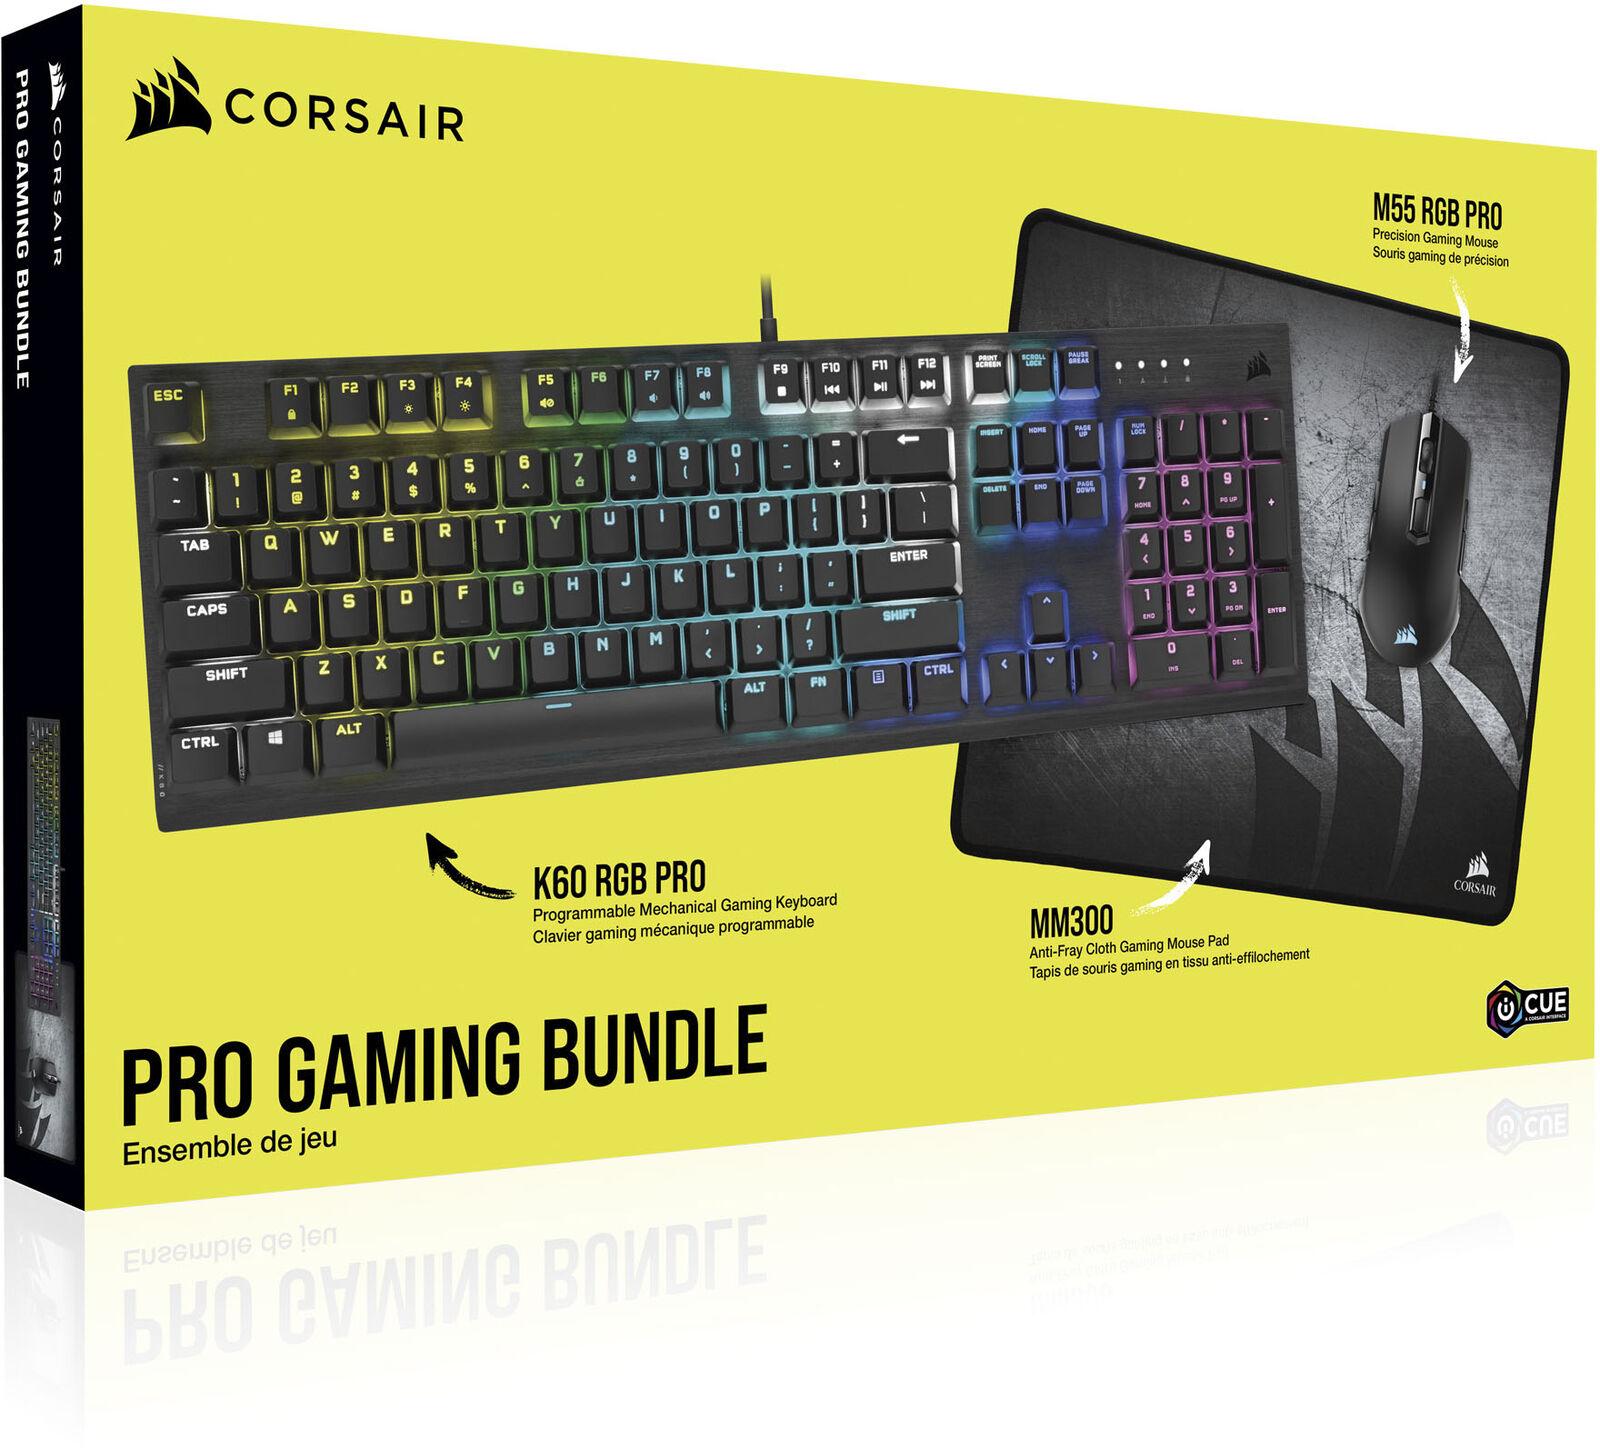 Corsair K60 RGB Pro Full-size Wired Gaming Bundle for $74.99 Shipped